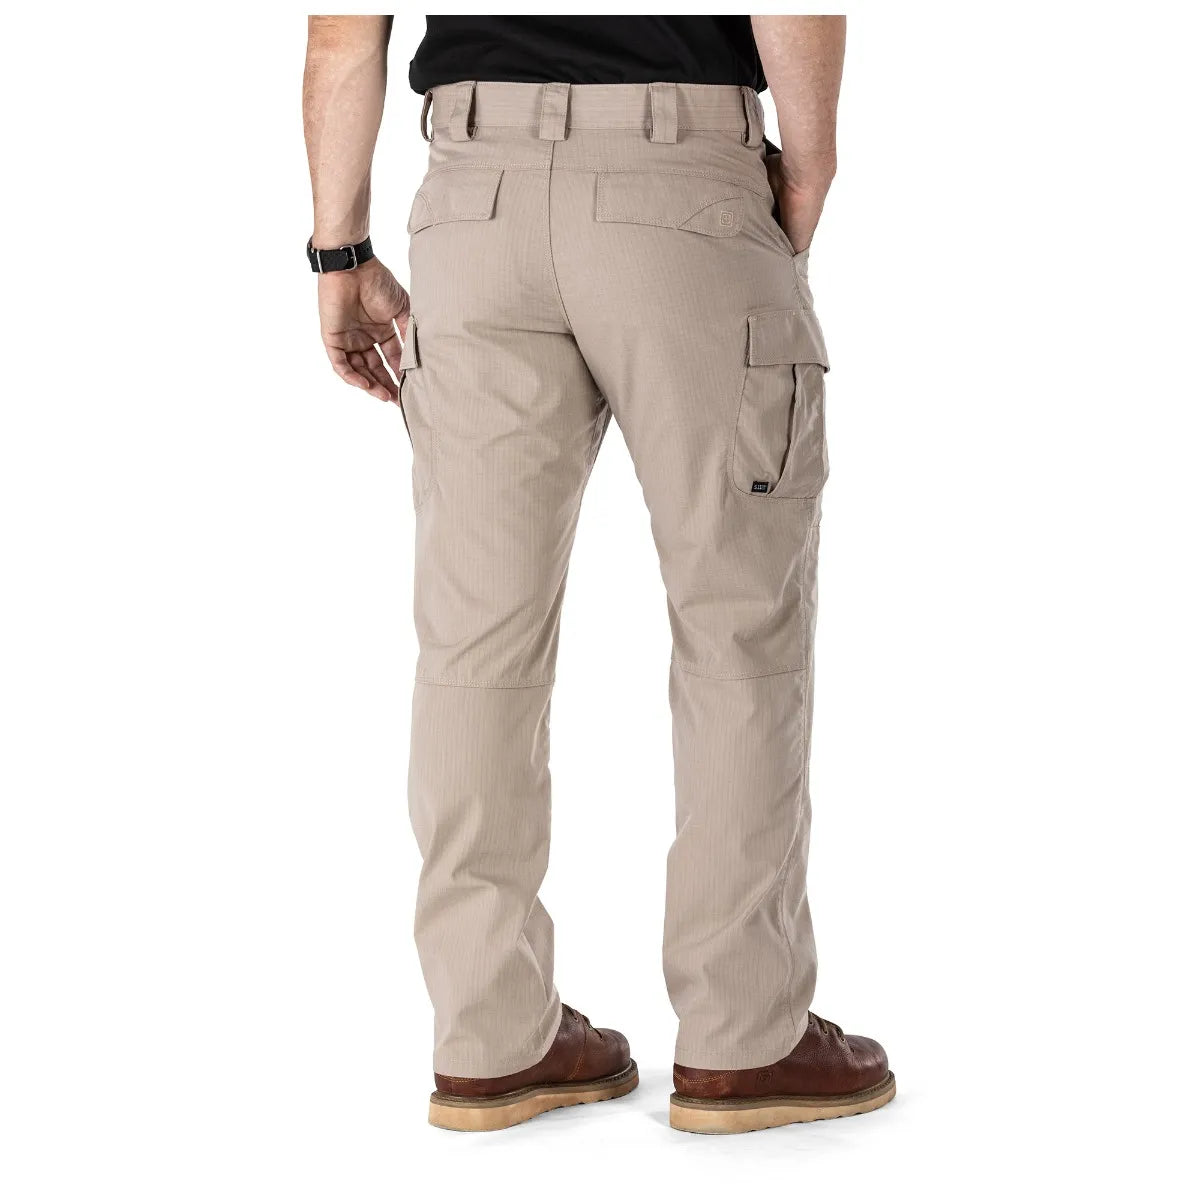 Self-Adjusting Waistband Pant: Provides a secure and comfortable fit.